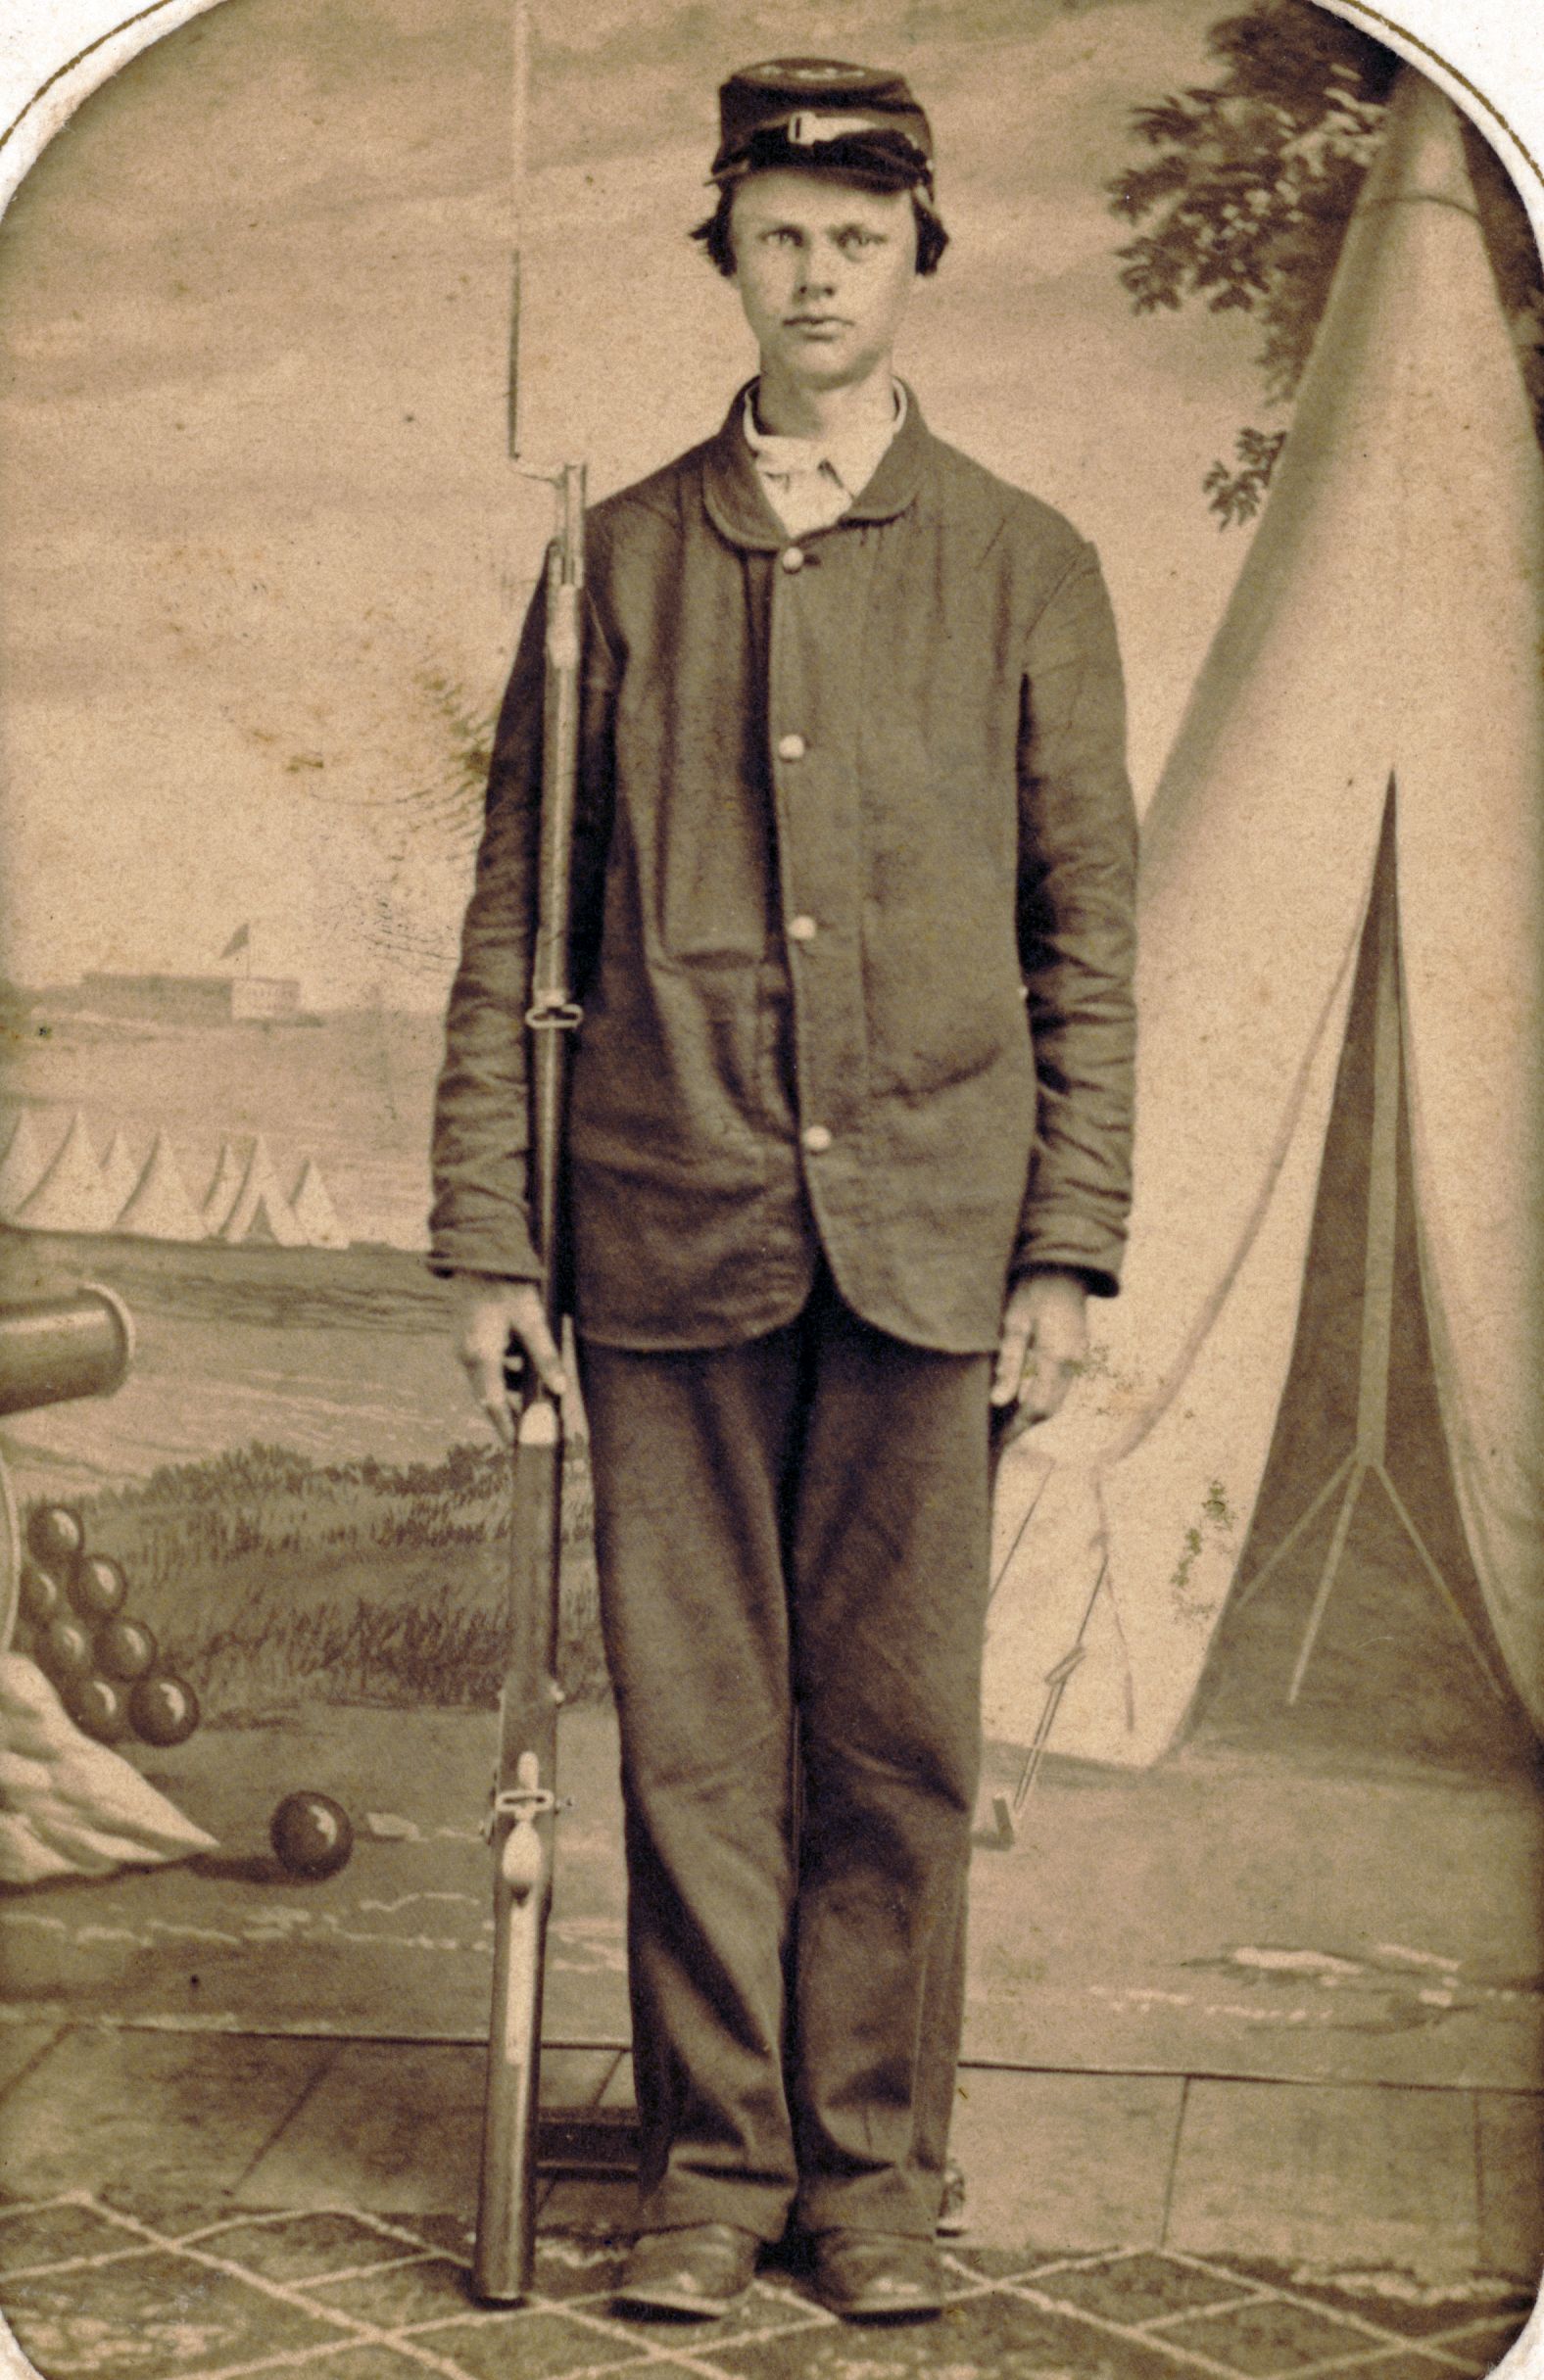 Private John Bingham died at Antietam. at the age of 18 only weeks after mustering into the 16th Connecticut Infantry. 